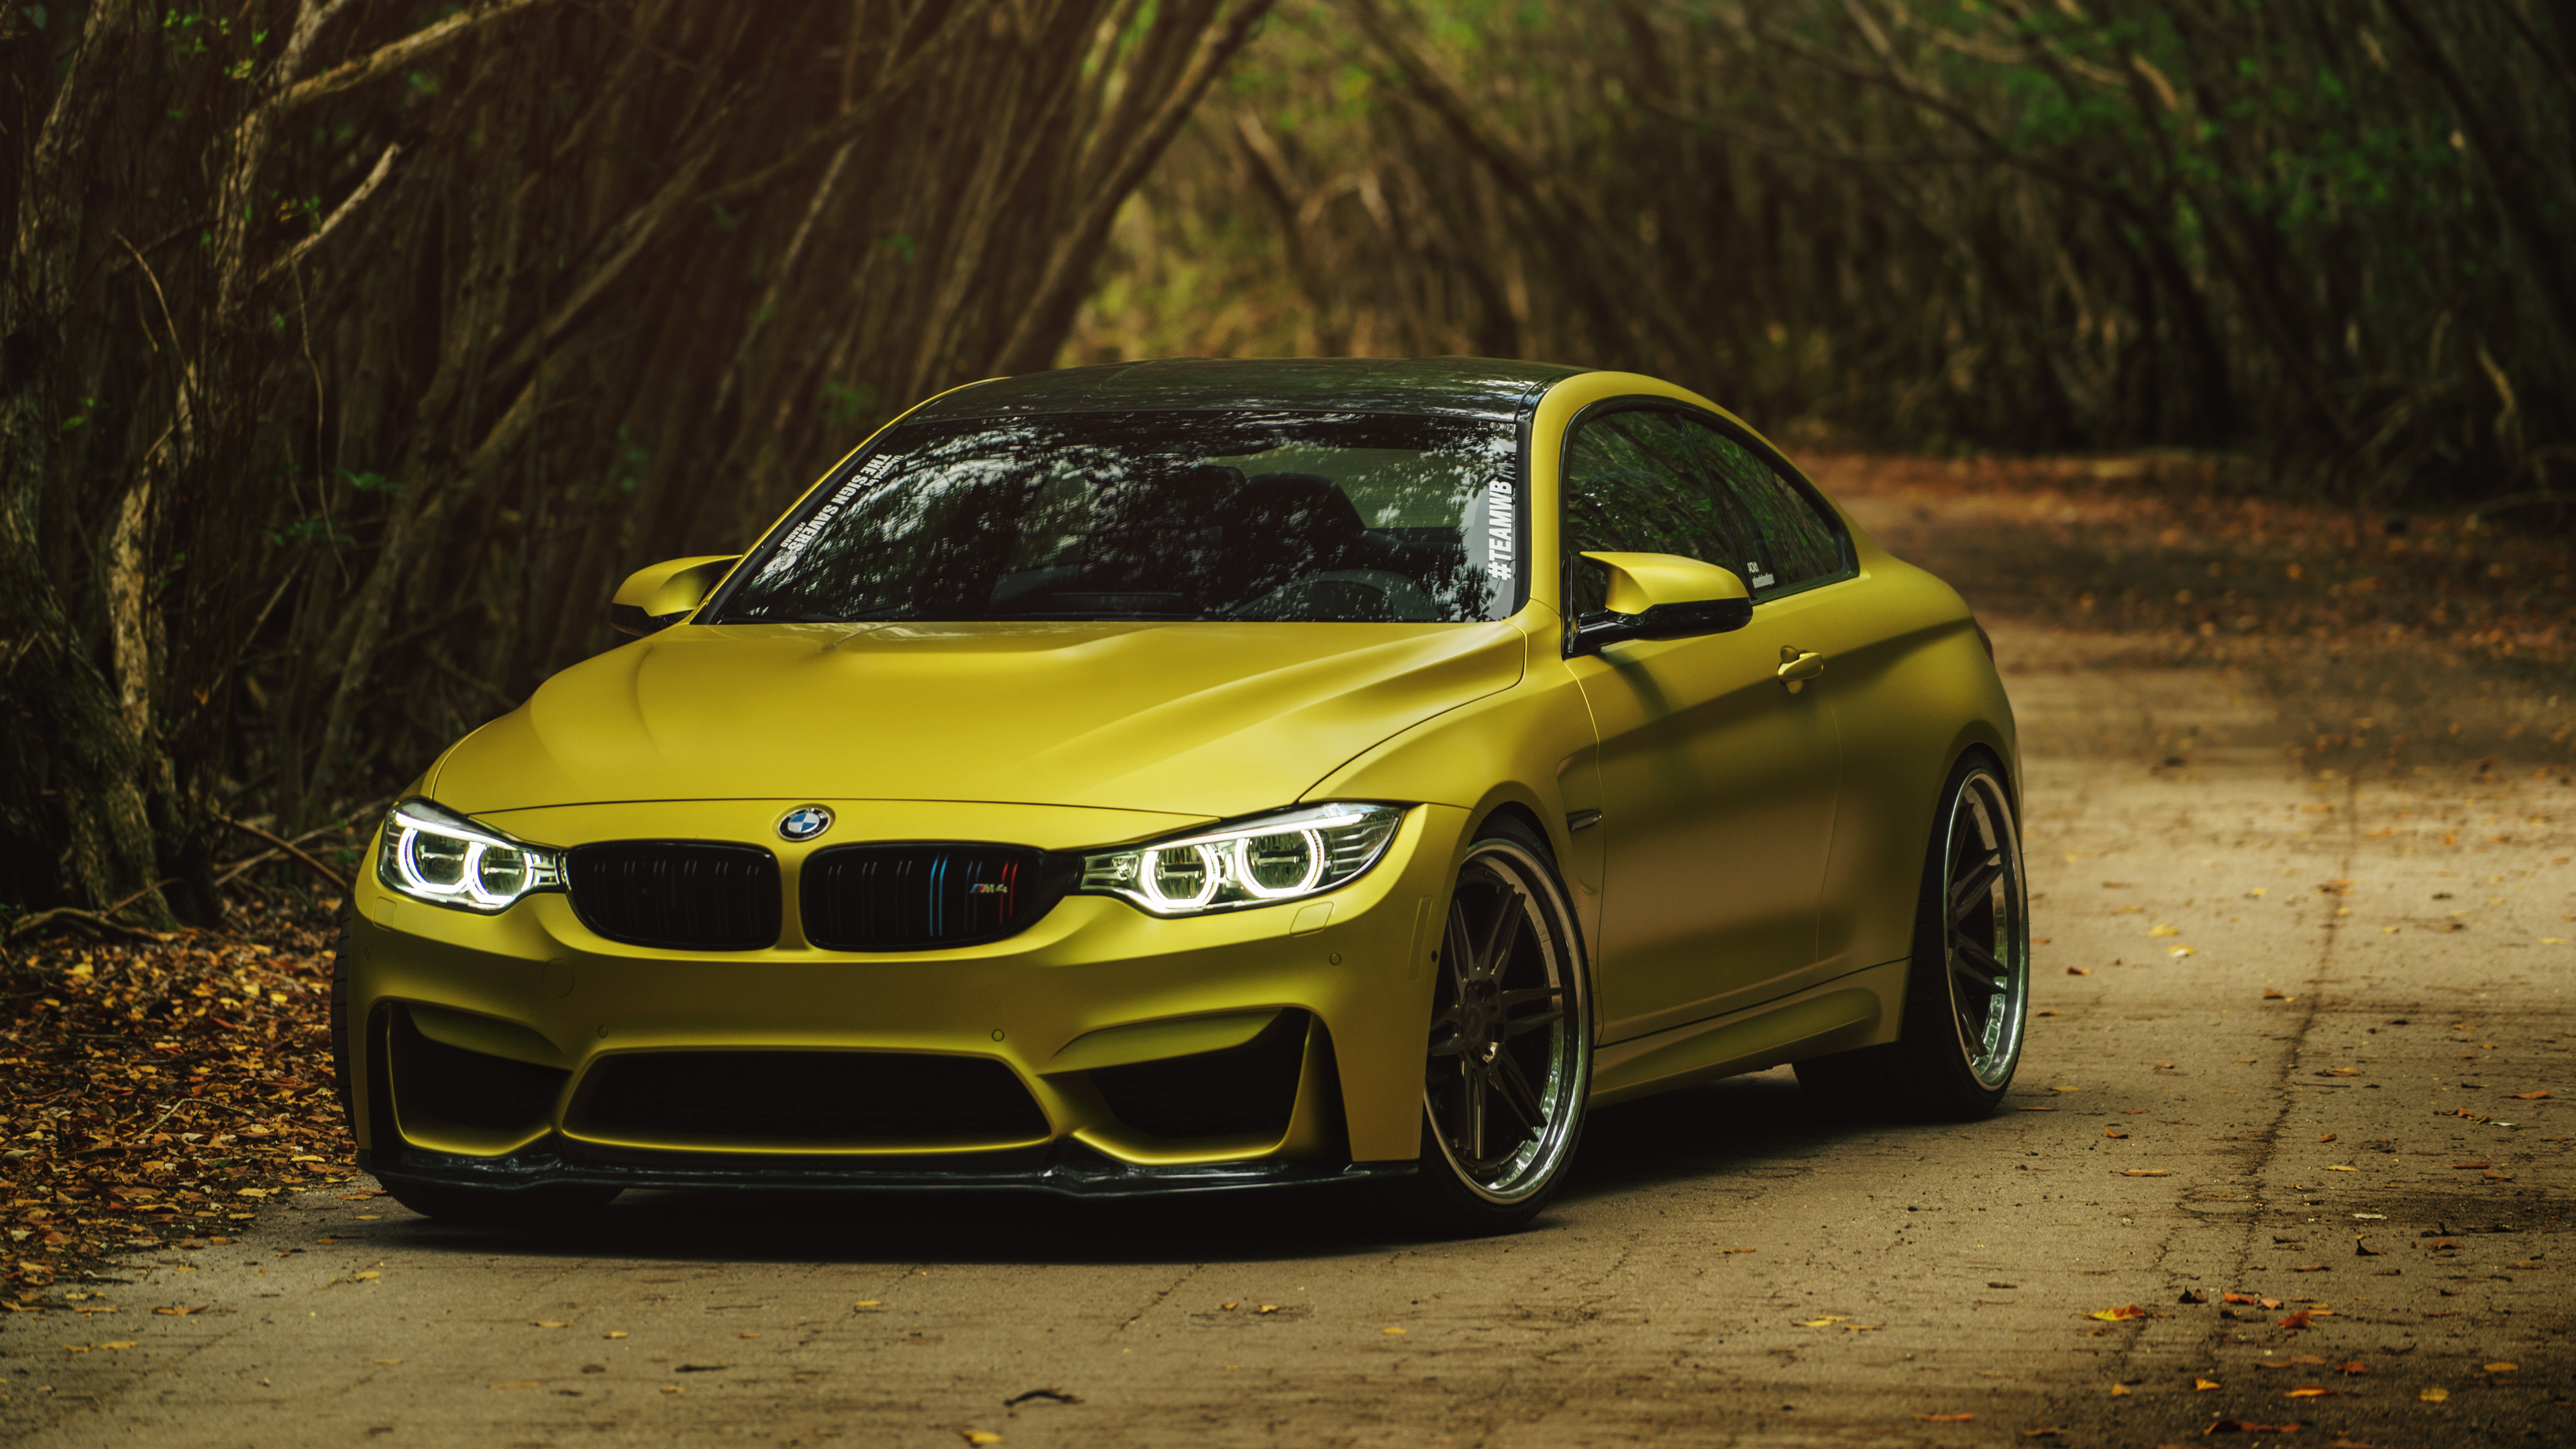 3840x2160 BMW images BMW M4 (Golden) HD wallpaper and background photos